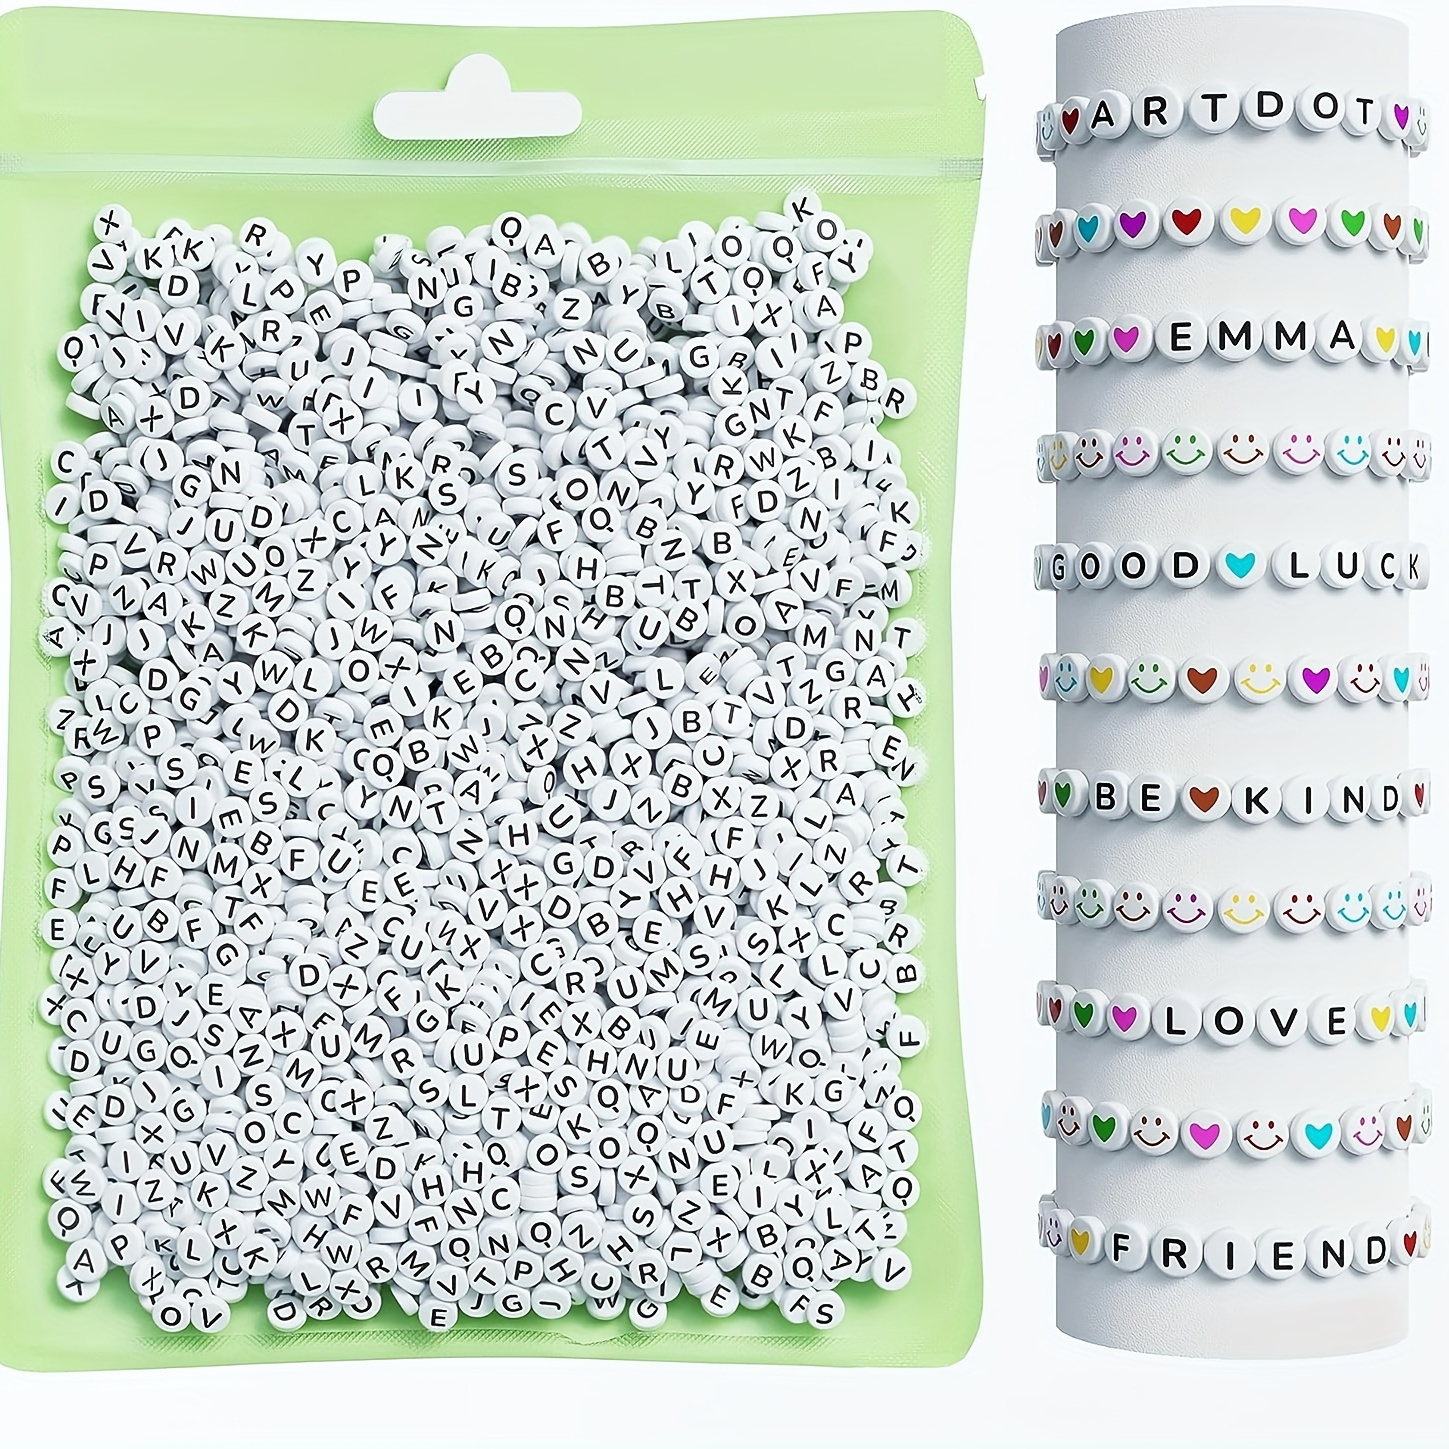 1200 Pieces Alphabet Letter Beads Set Spacer Bead 6mm A-Z Beaded Round for  DIY Jewelry Making Findings Art Crafts Bracelets